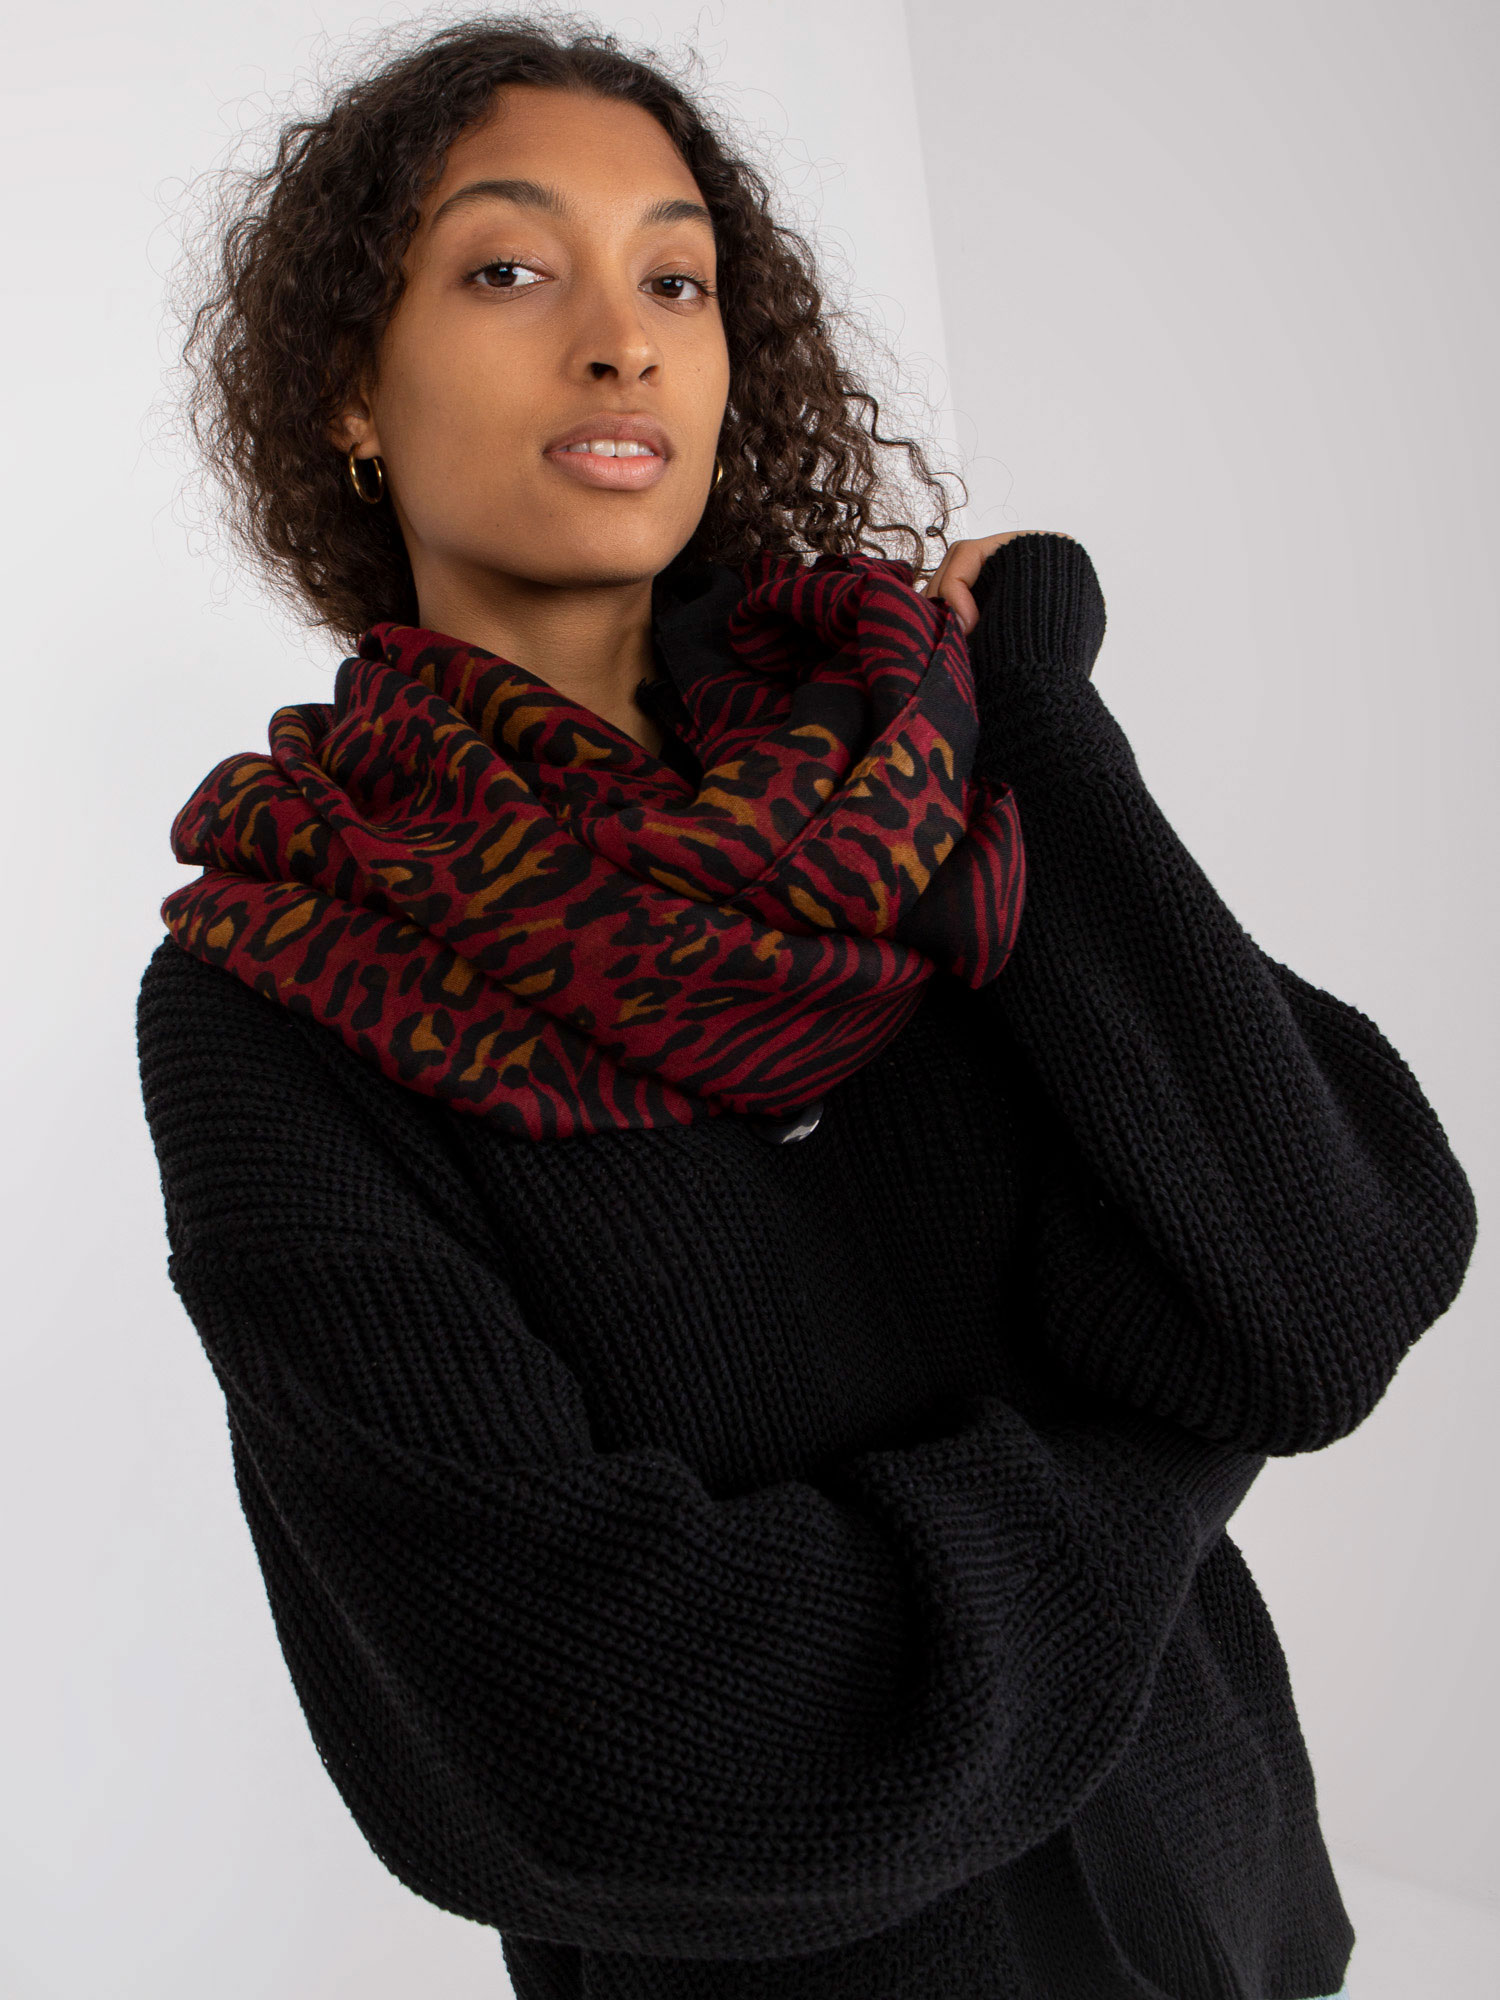 Black-brown scarf with animal patterns